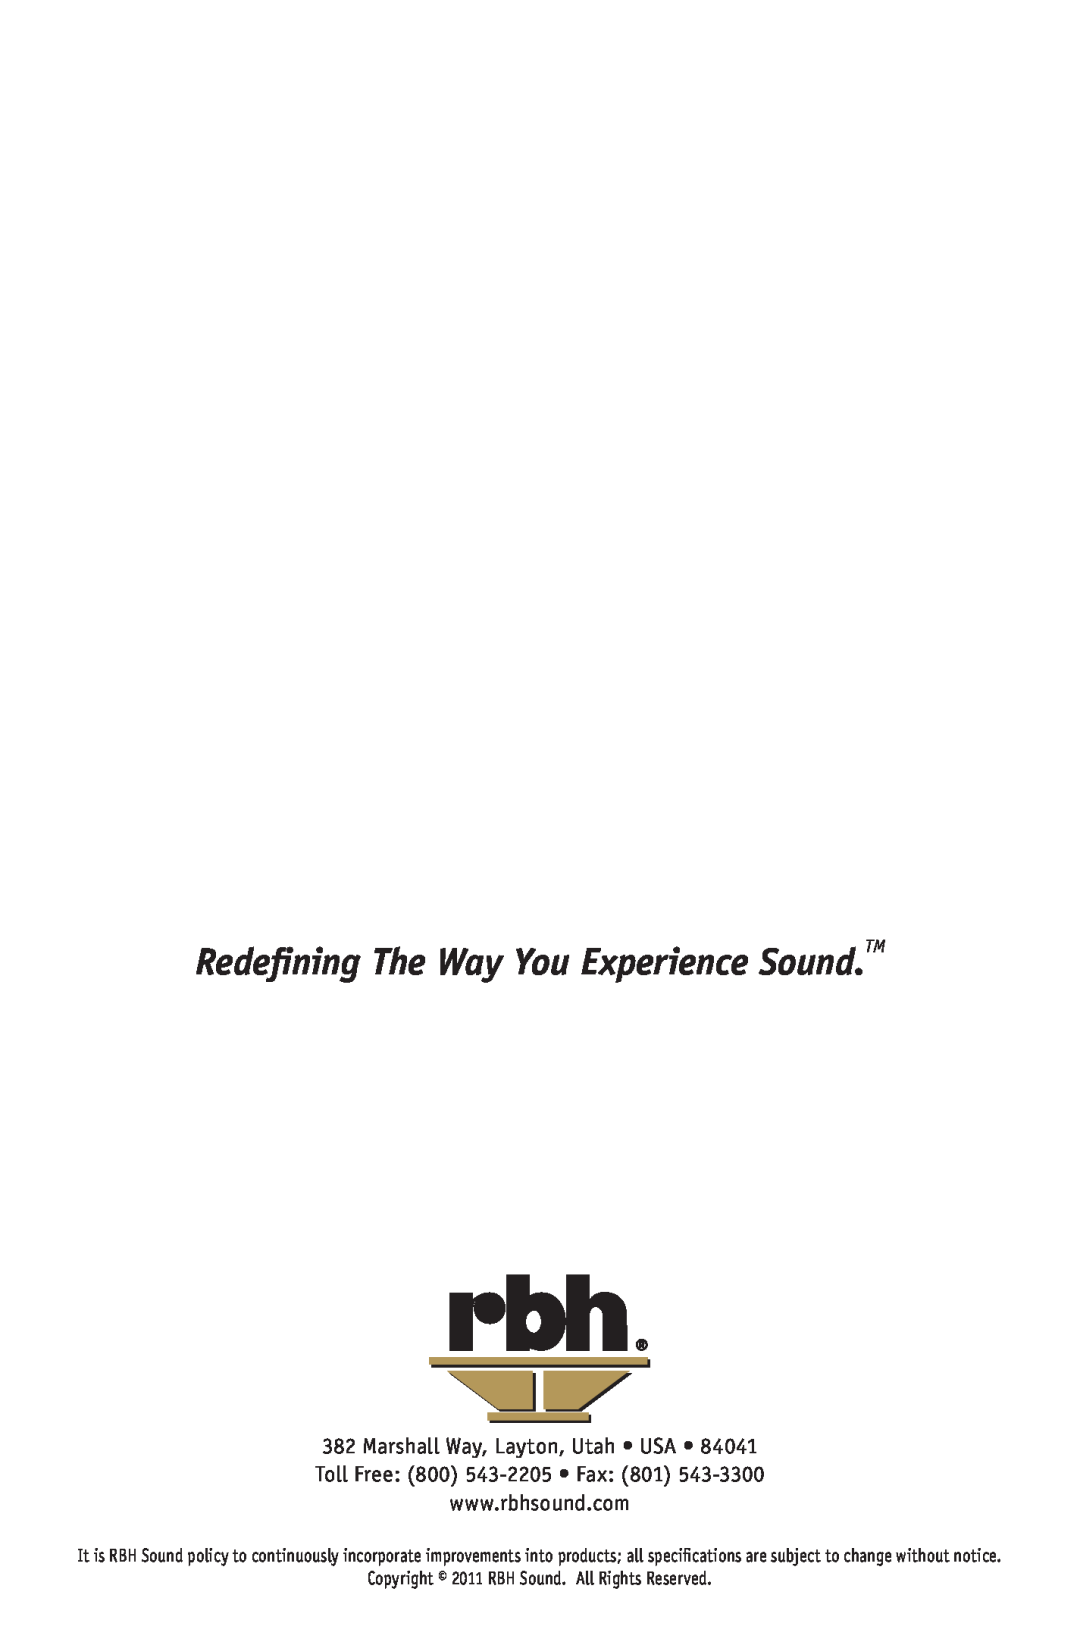 RBH Sound S-12, S-10 owner manual Redefining The Way You Experience Sound.TM, Copyright 2011 RBH Sound. All Rights Reserved 